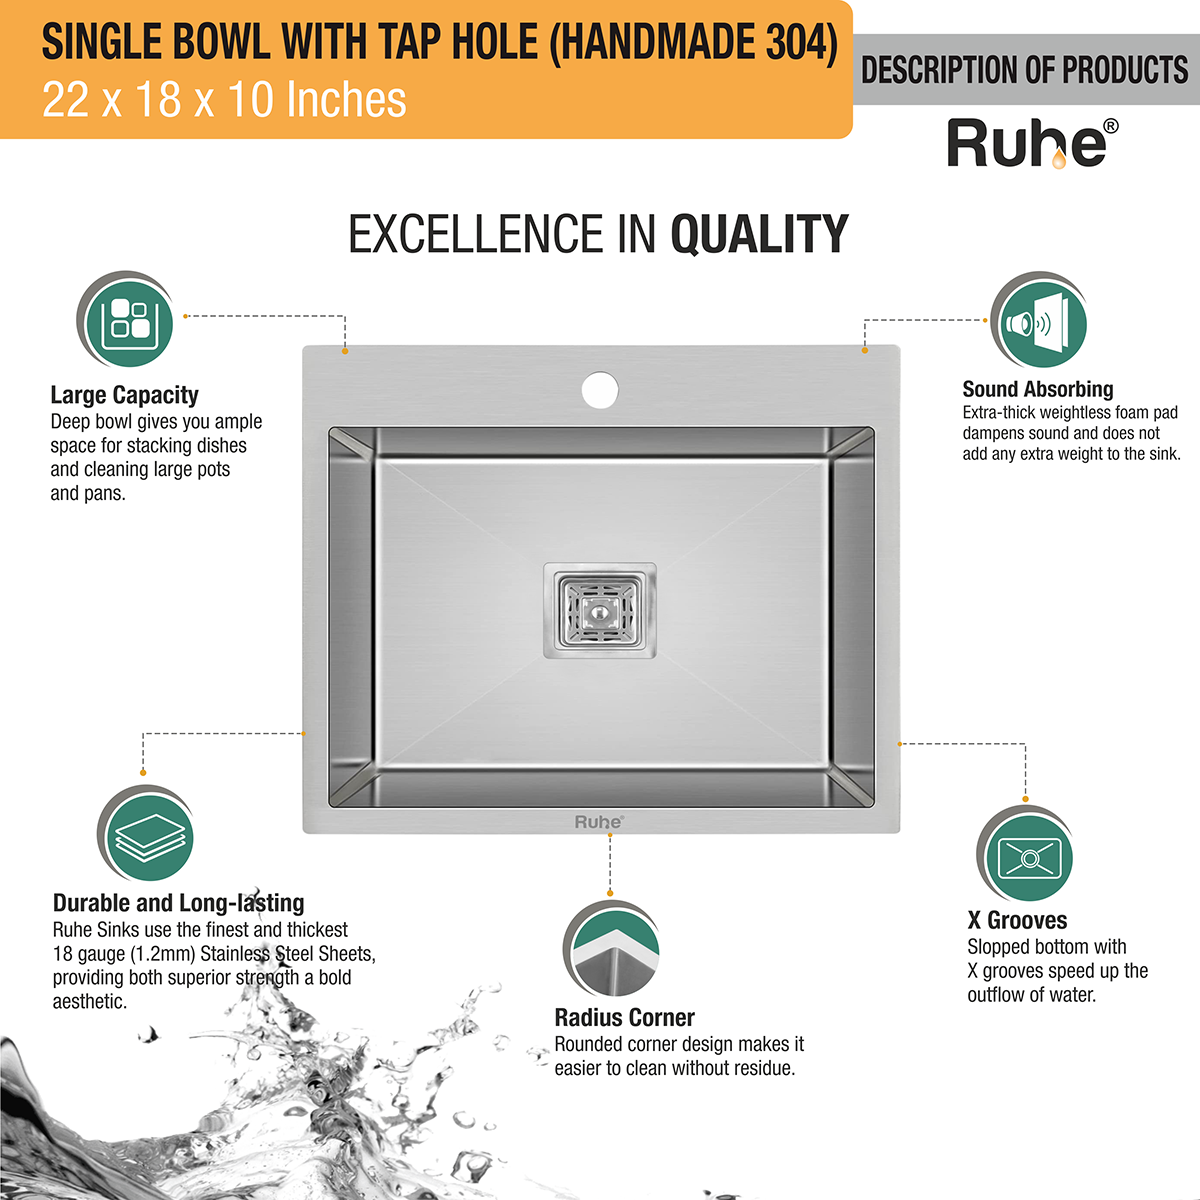 Handmade Single Bowl 304-Grade Kitchen Sink (22 x 18 x 10 Inches) with Tap Hole quality of product